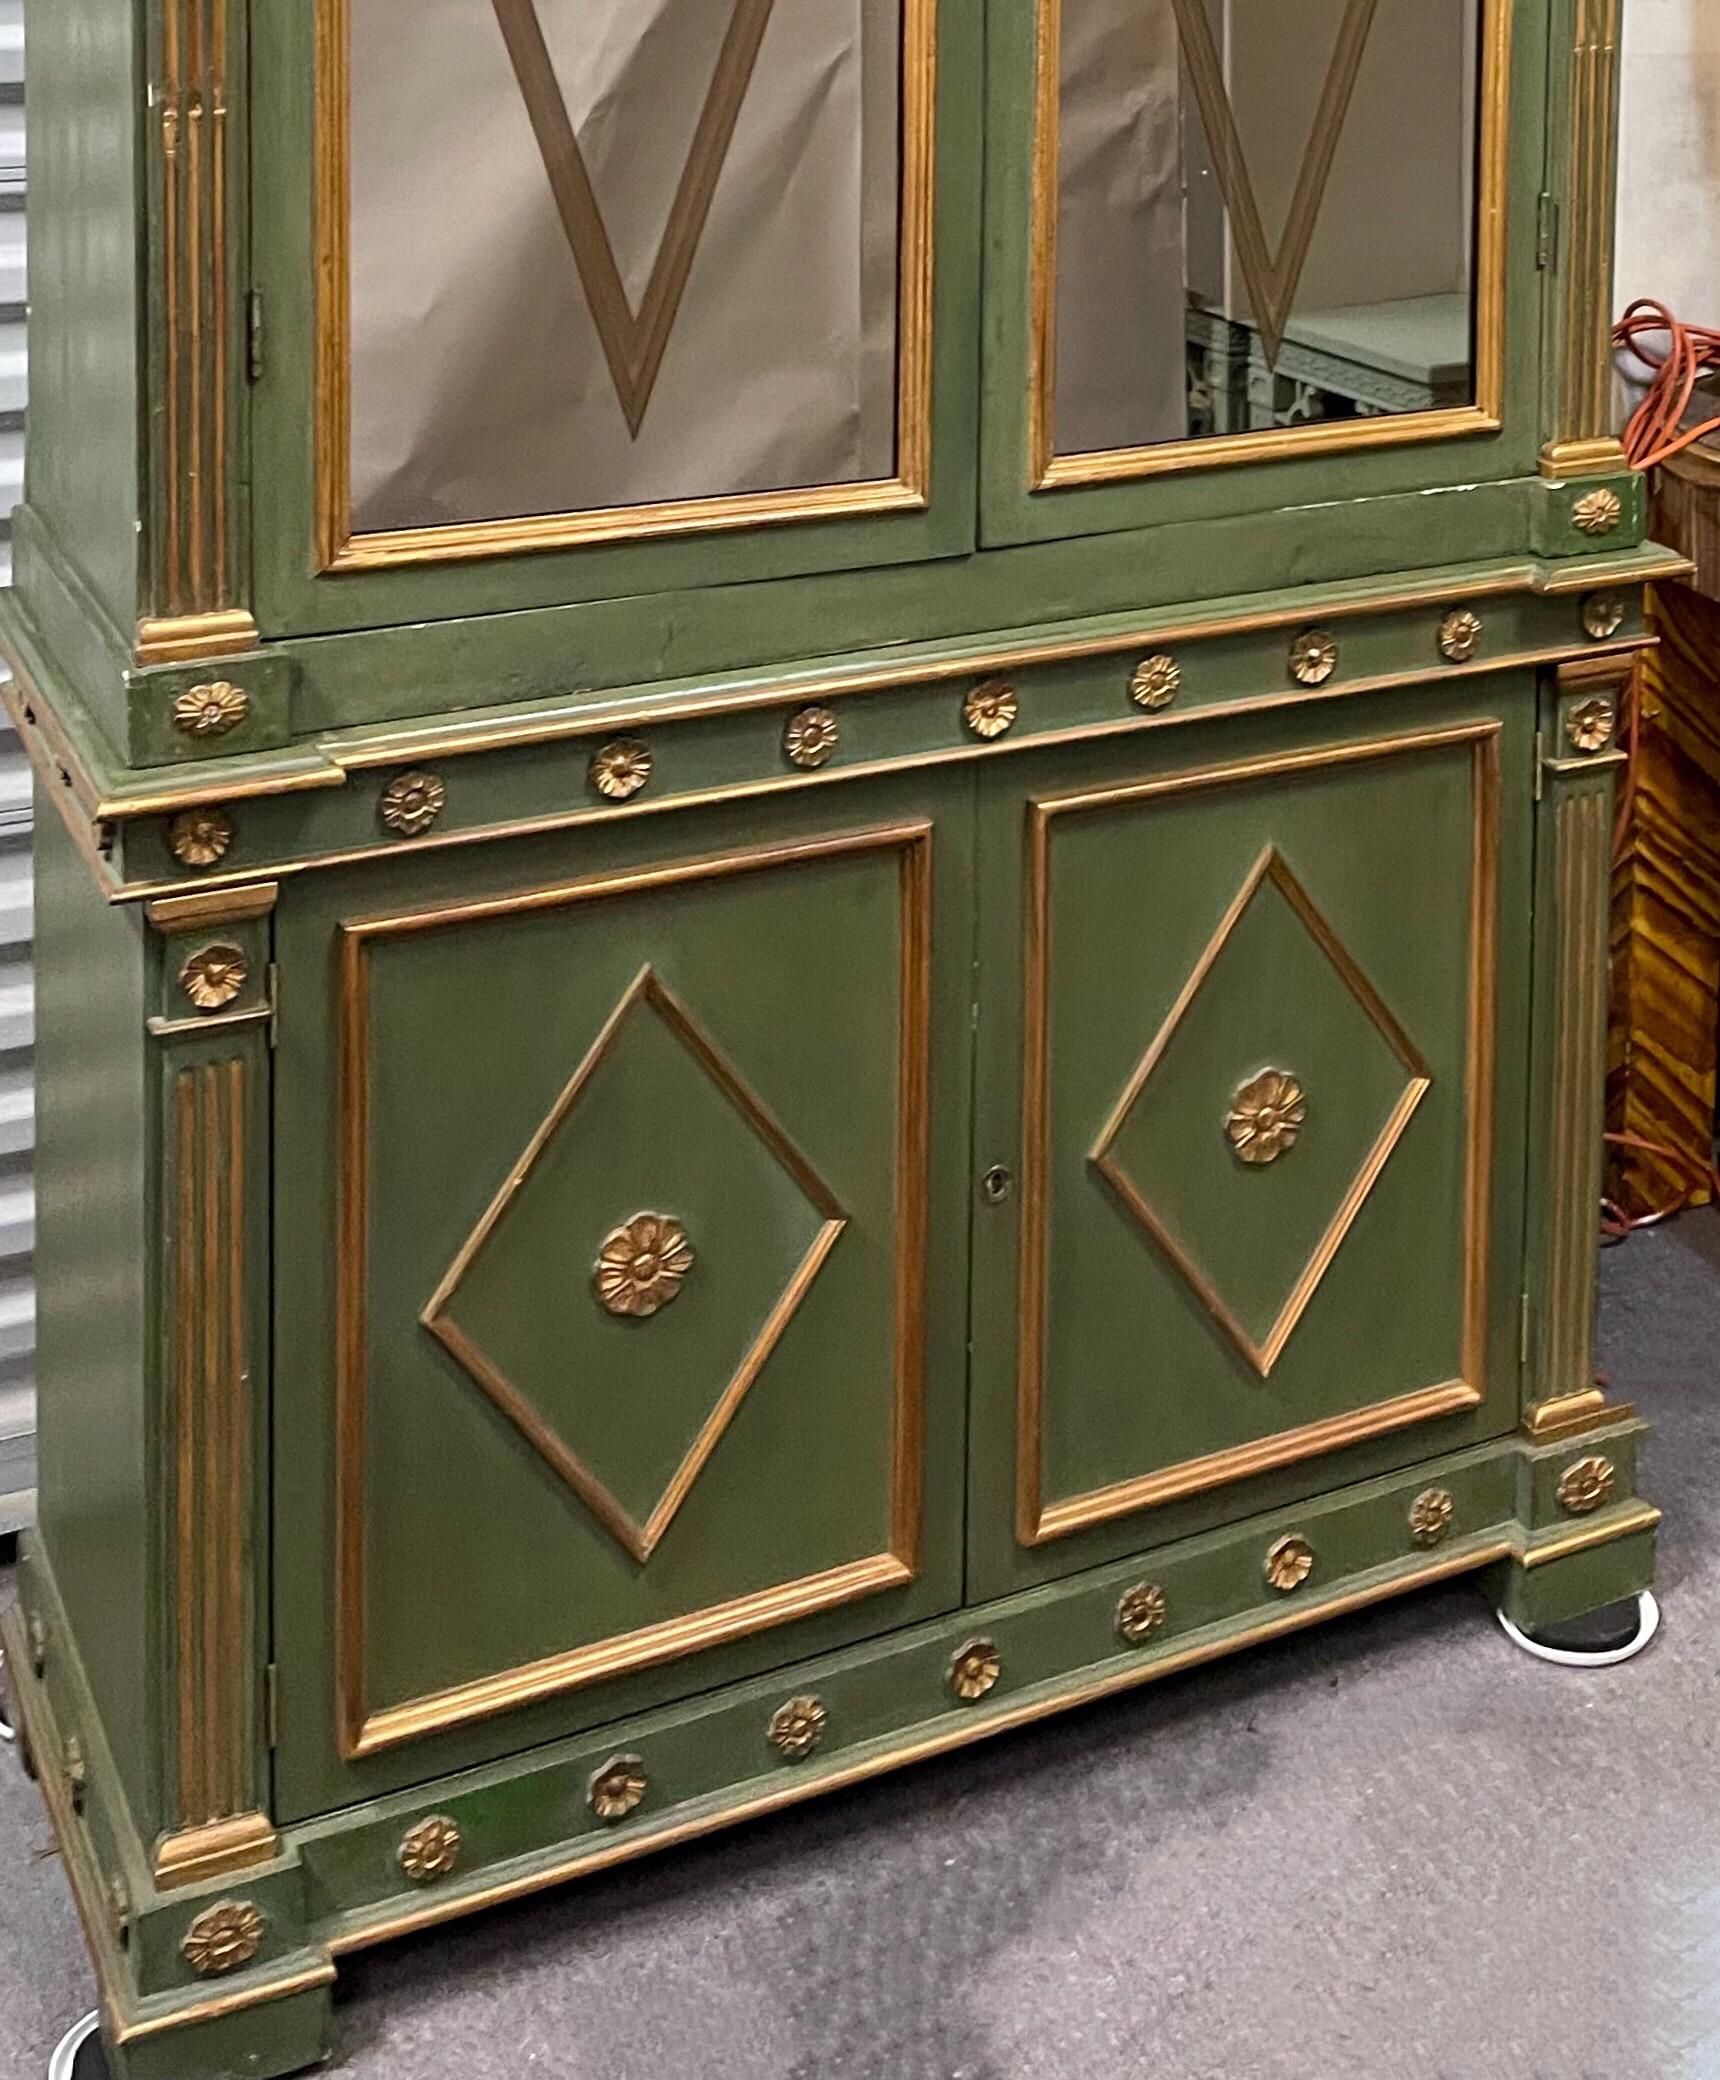 Italian Early 20th-C. Painted Venetian Neo-Classical Style Cabinet or Bar